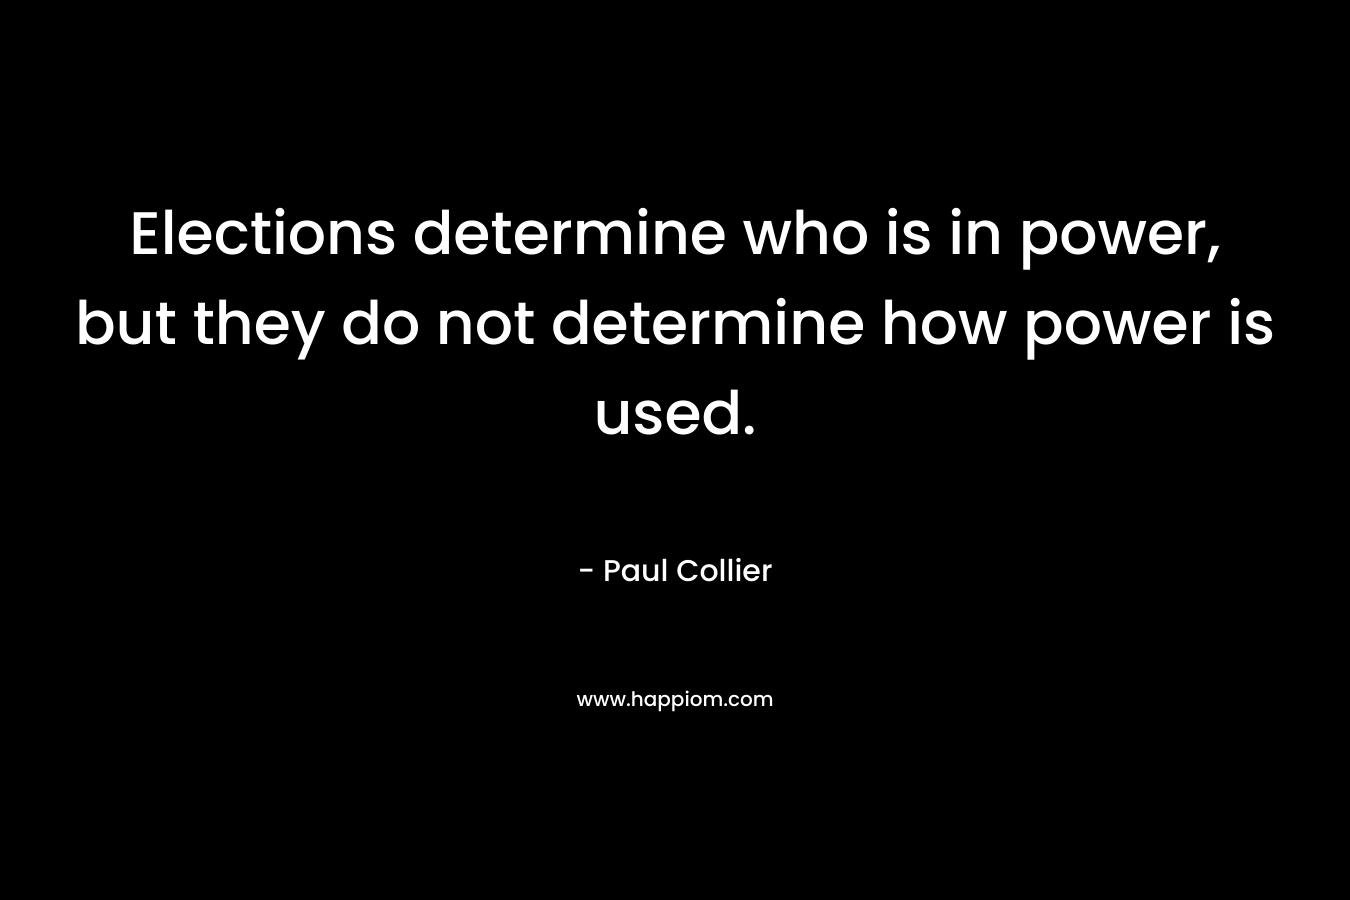 Elections determine who is in power, but they do not determine how power is used.